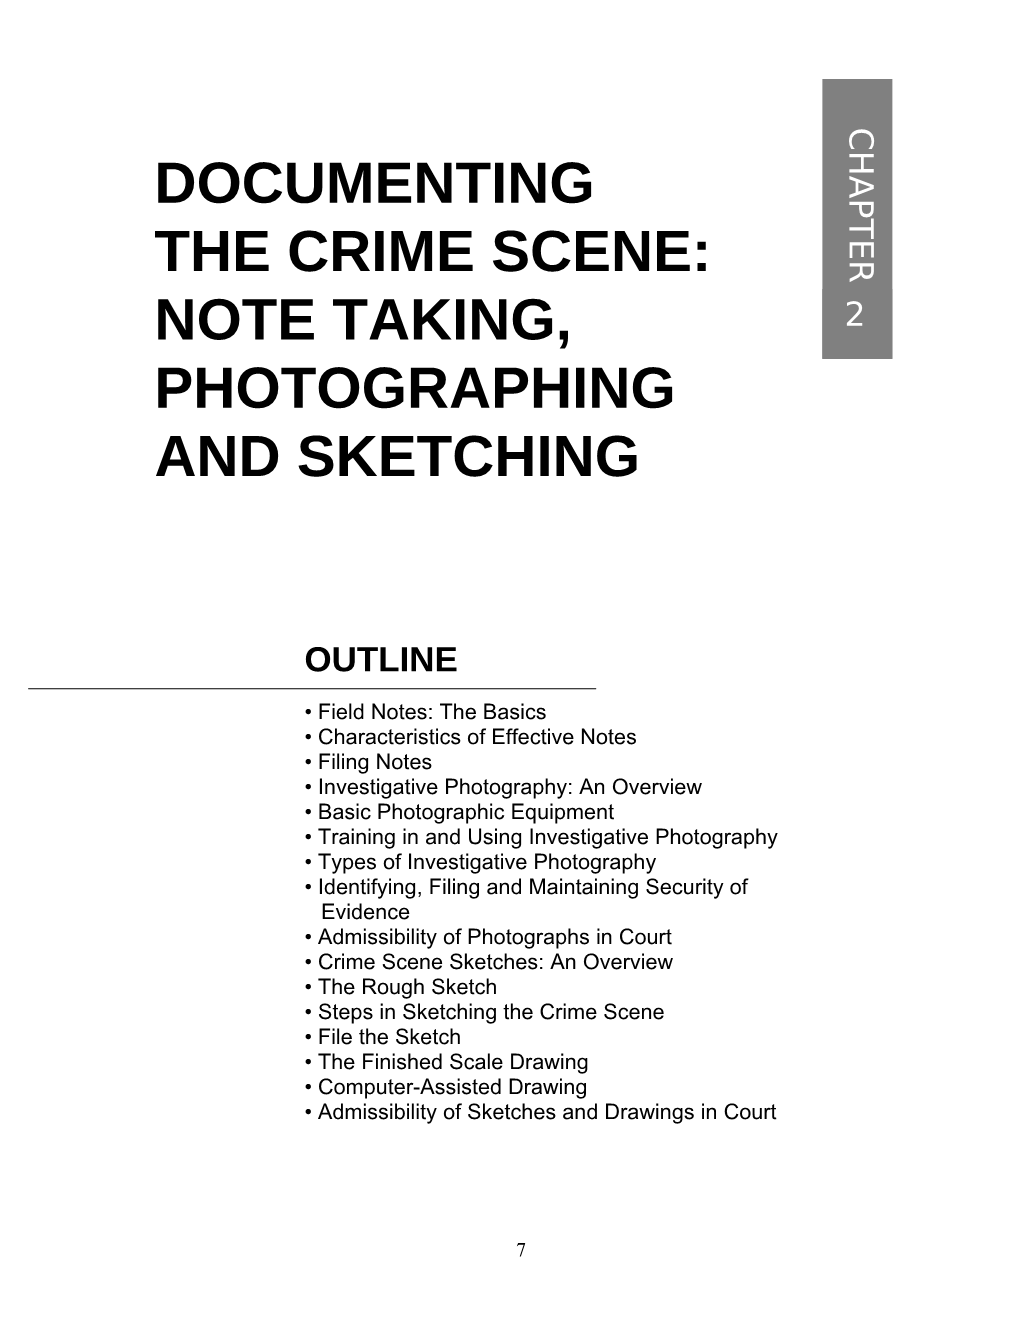 Chapter 2: Documenting the Crime Scene: Note Taking, Photographing and Sketching